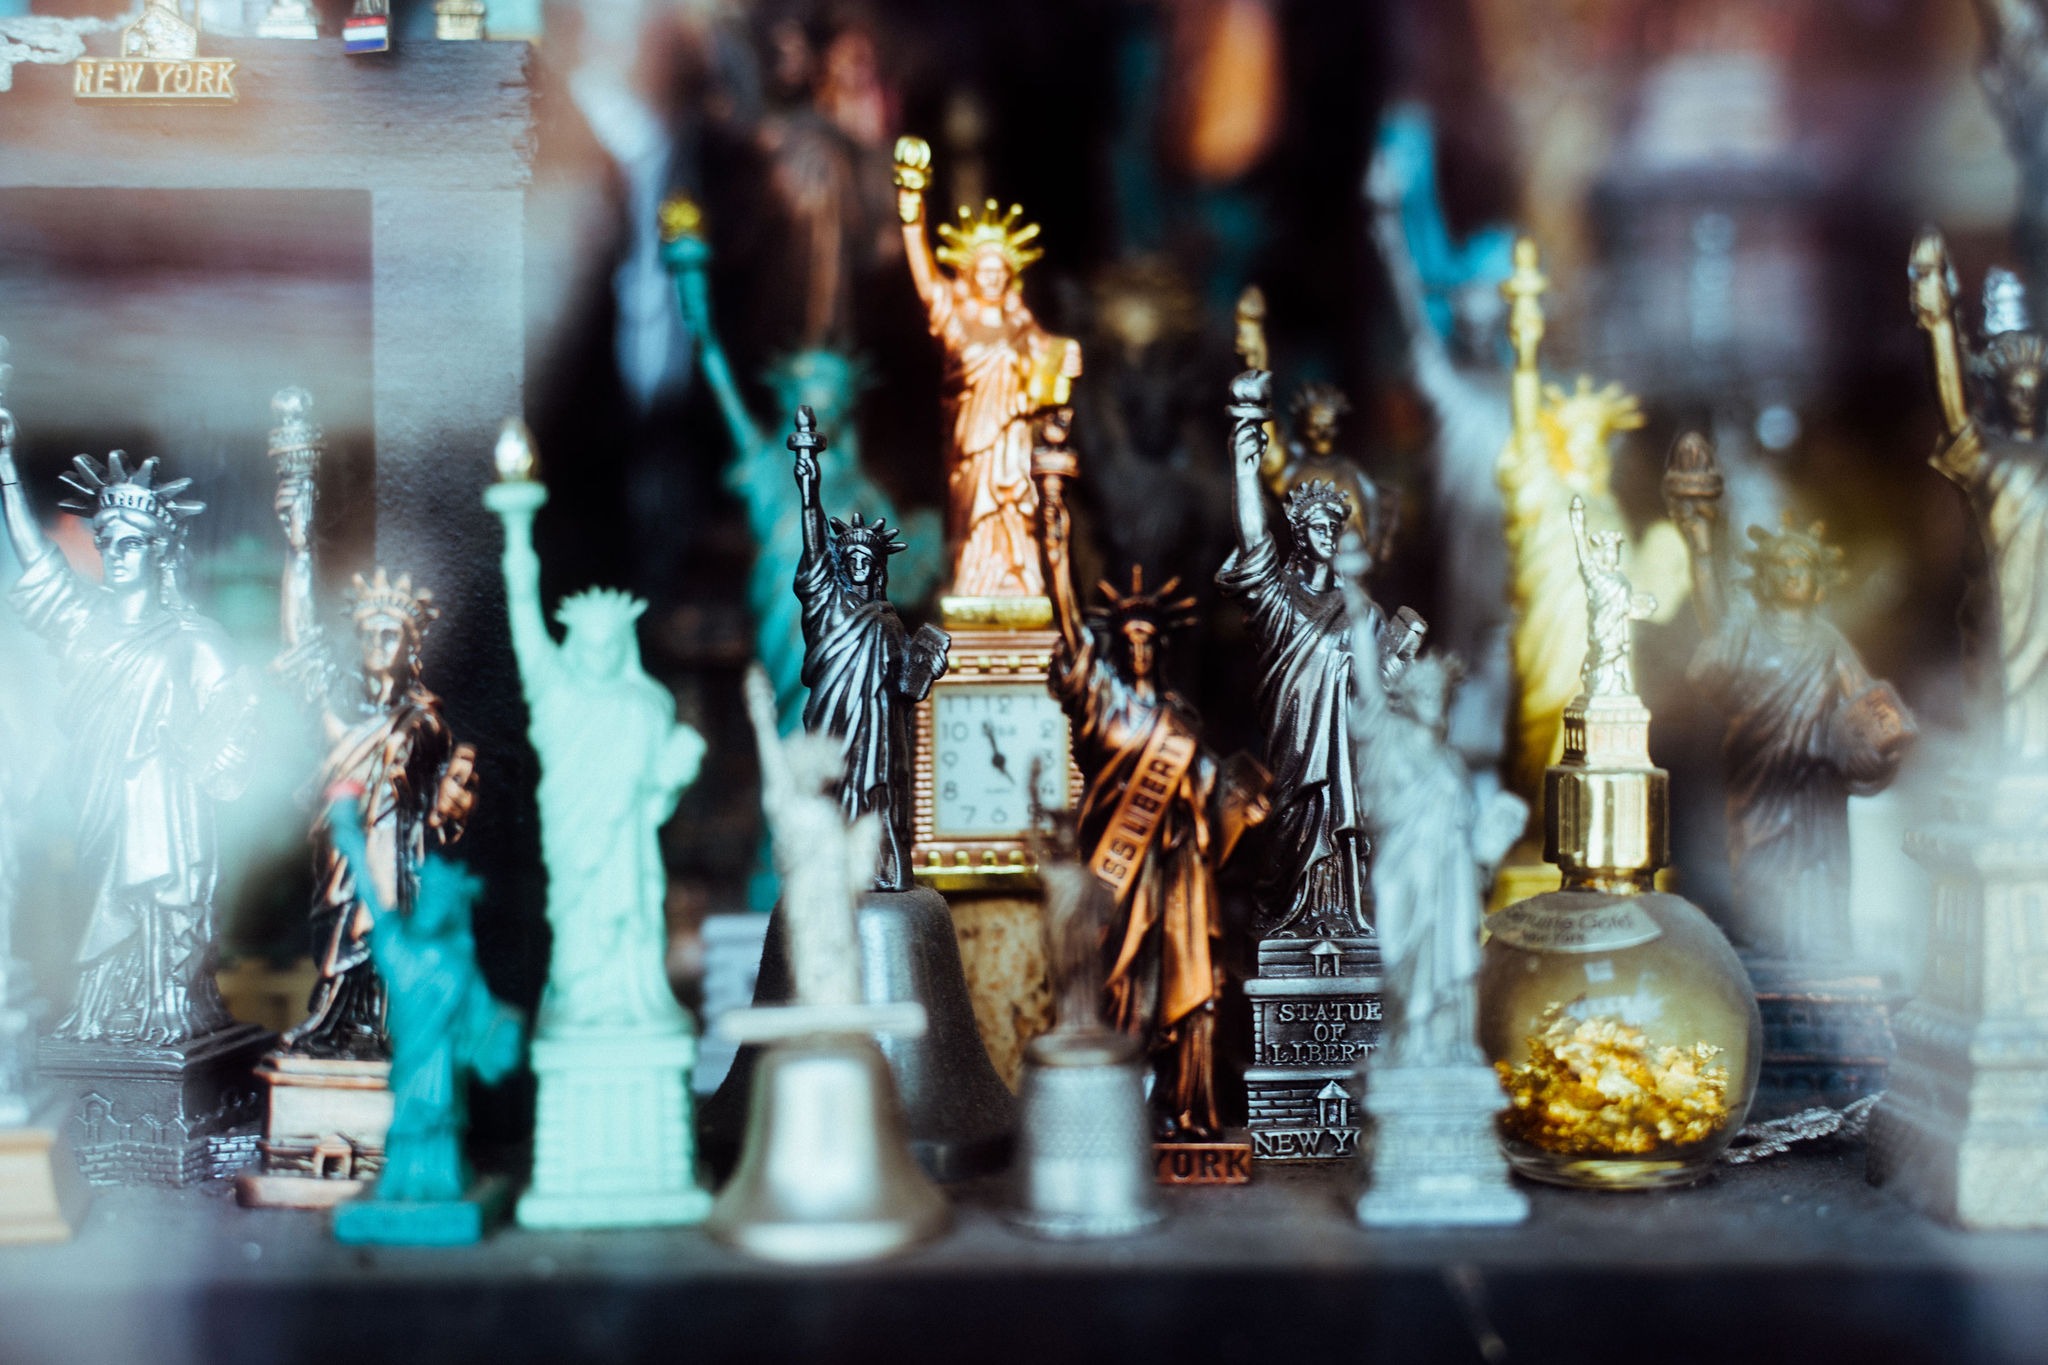 Miniature figures of Statue of Liberty in various colours and sizes